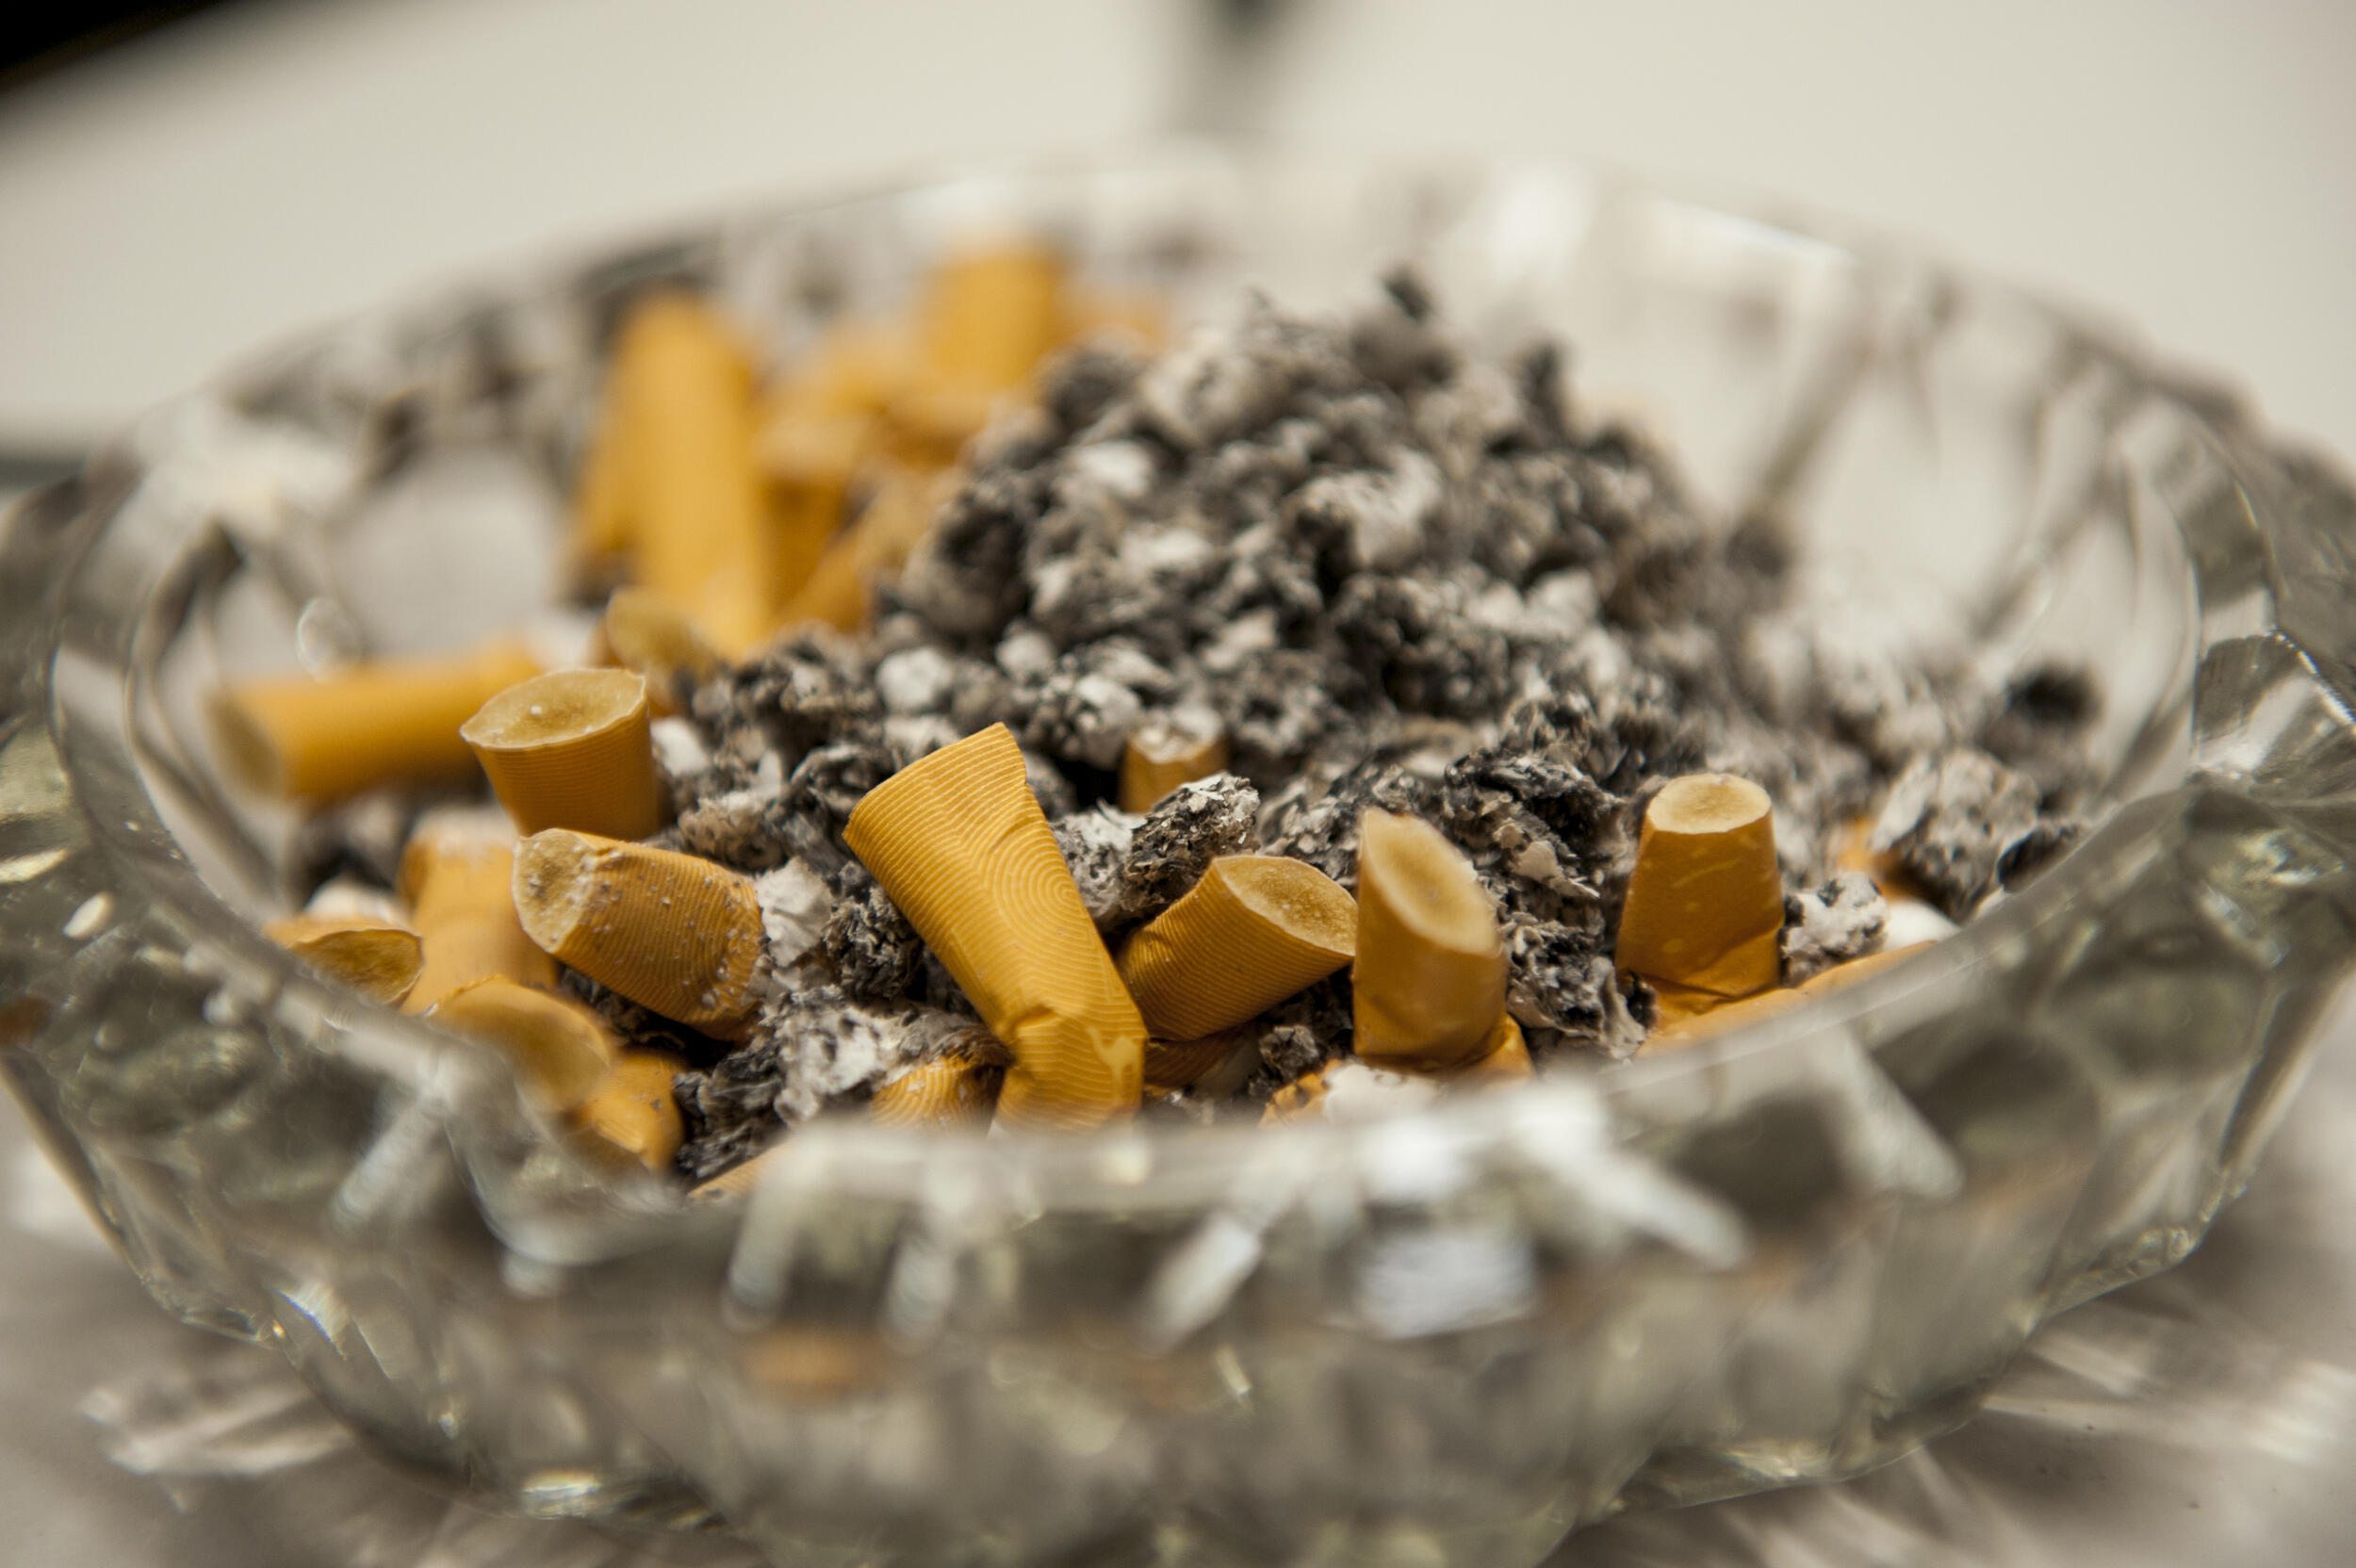 A glass ashtray filled with cigarette butts and ash